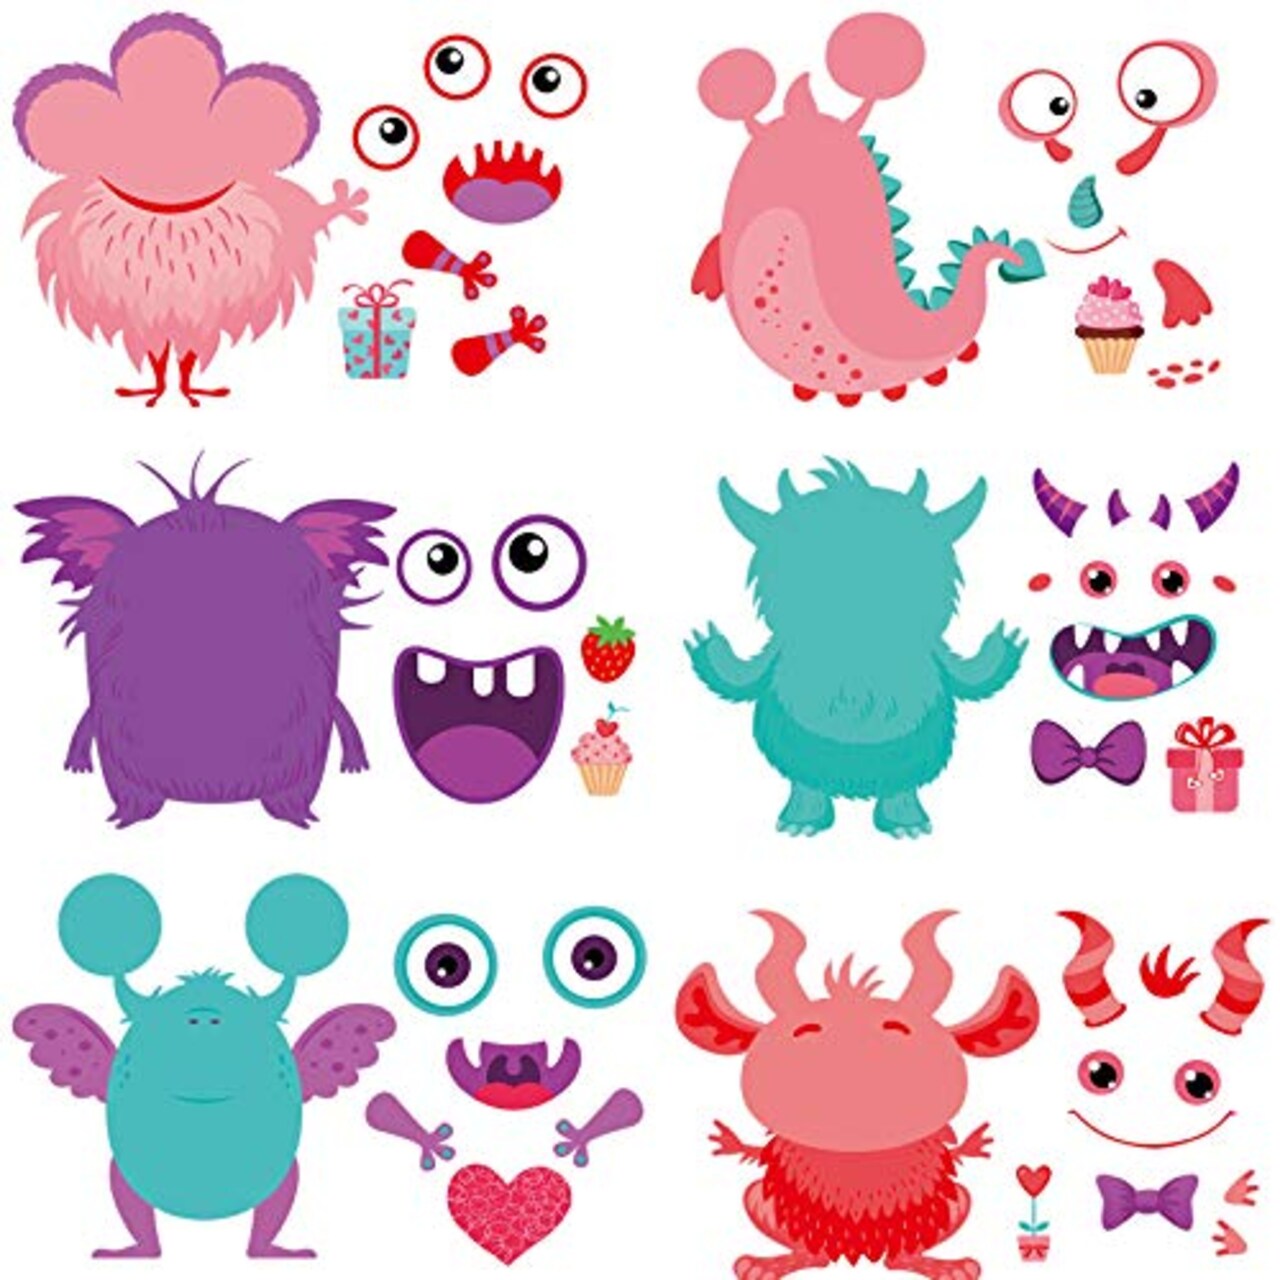 Zonon Pack of 24 Valentines Day Craft Kits for Kids, DIY Craft